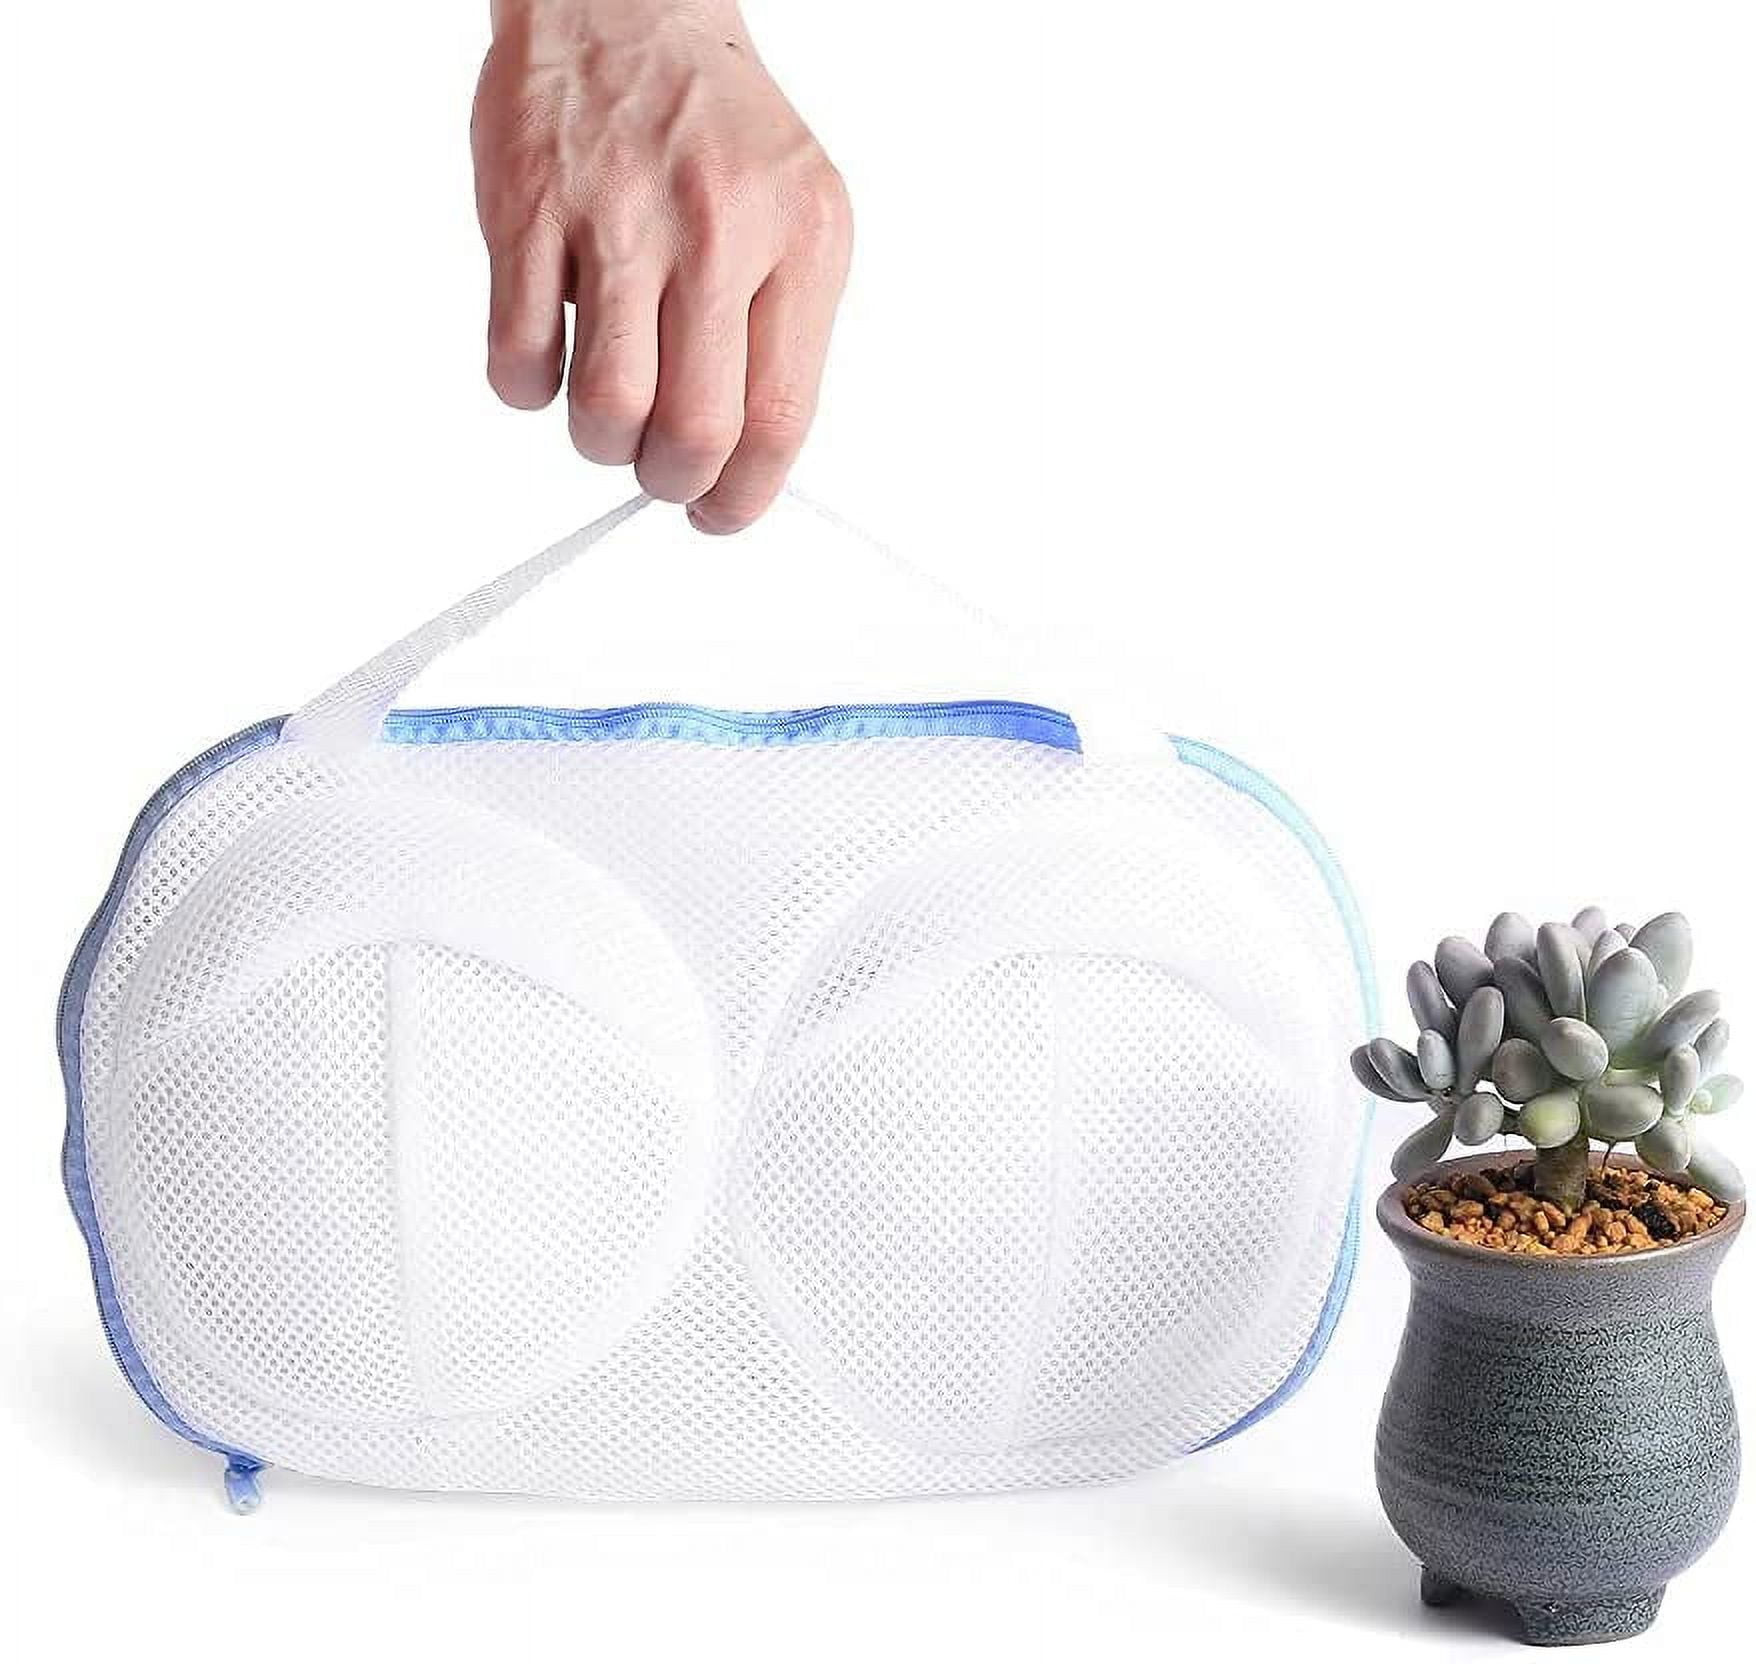 Large Mesh Lingerie Bags for Laundry, Bra Washing Bag for Washing  Machine/Washer, A to G Cup Anti Deformation Bra Bag, Laundry Science  Premium Bra Wash Bag for Bras Lingerie Delicates, 